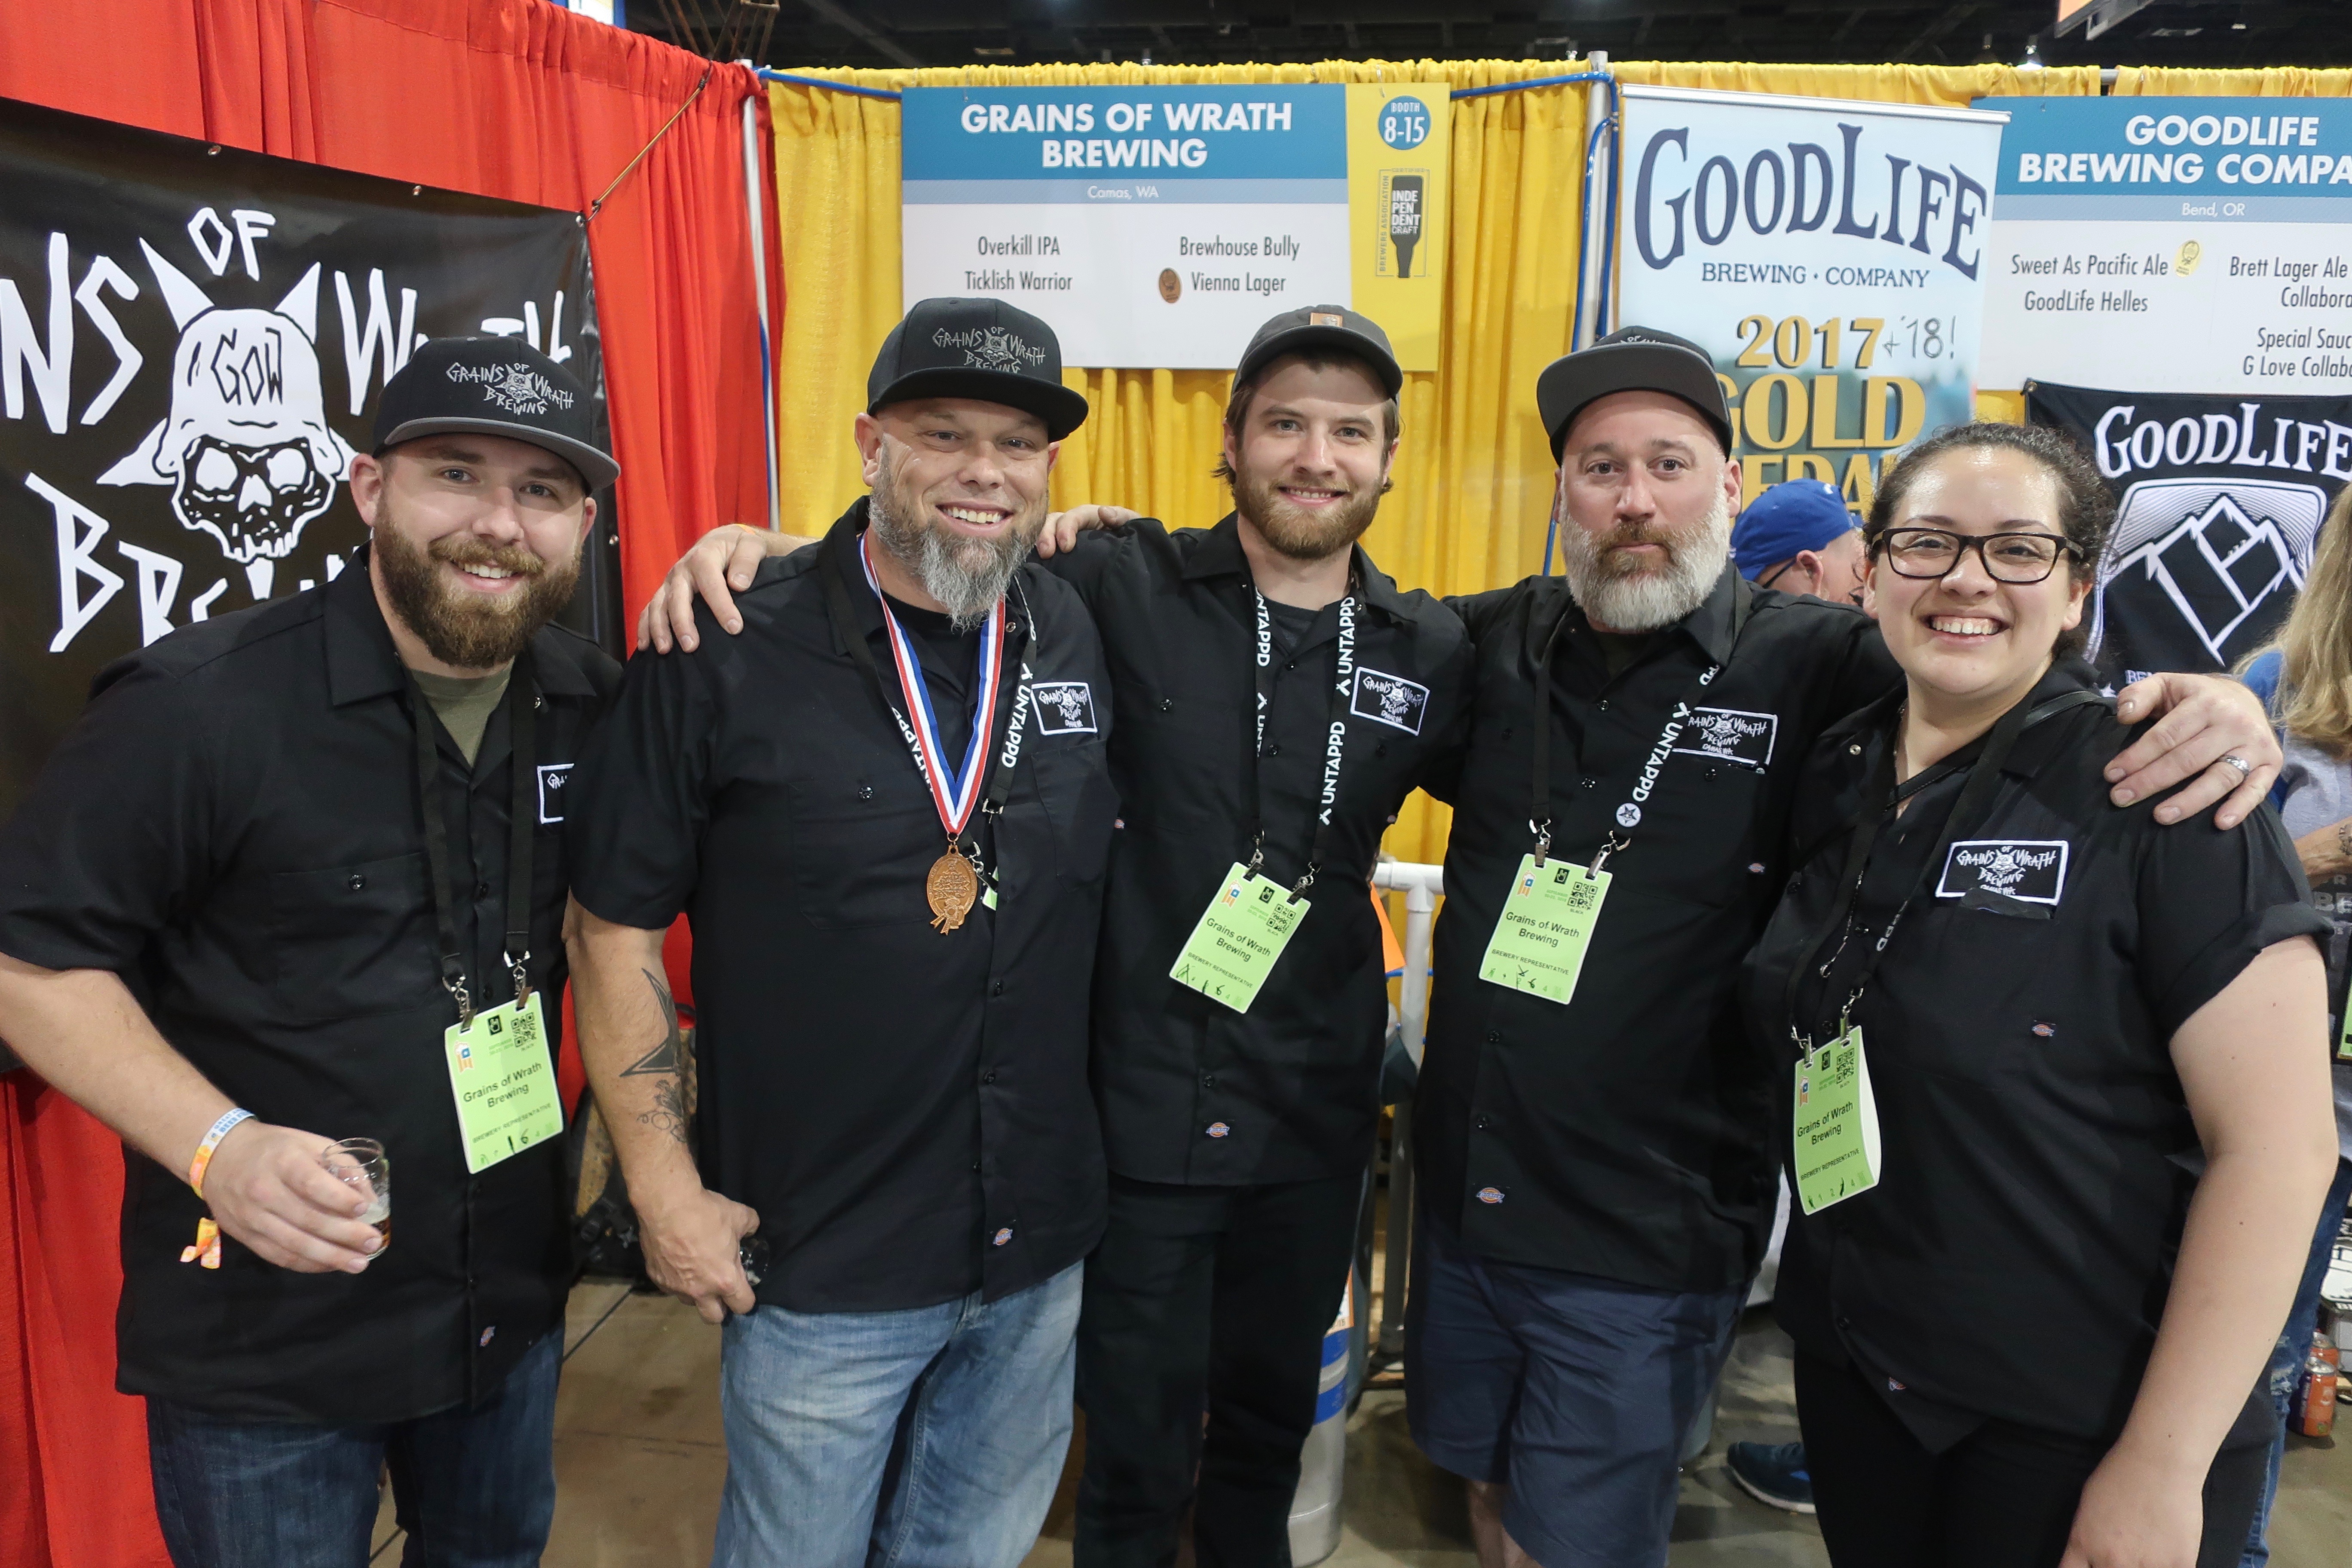 Grains of Wrath Brewing after winning their GABF Medal for Vienna Lager at the 2018 Great American Beer Festival.